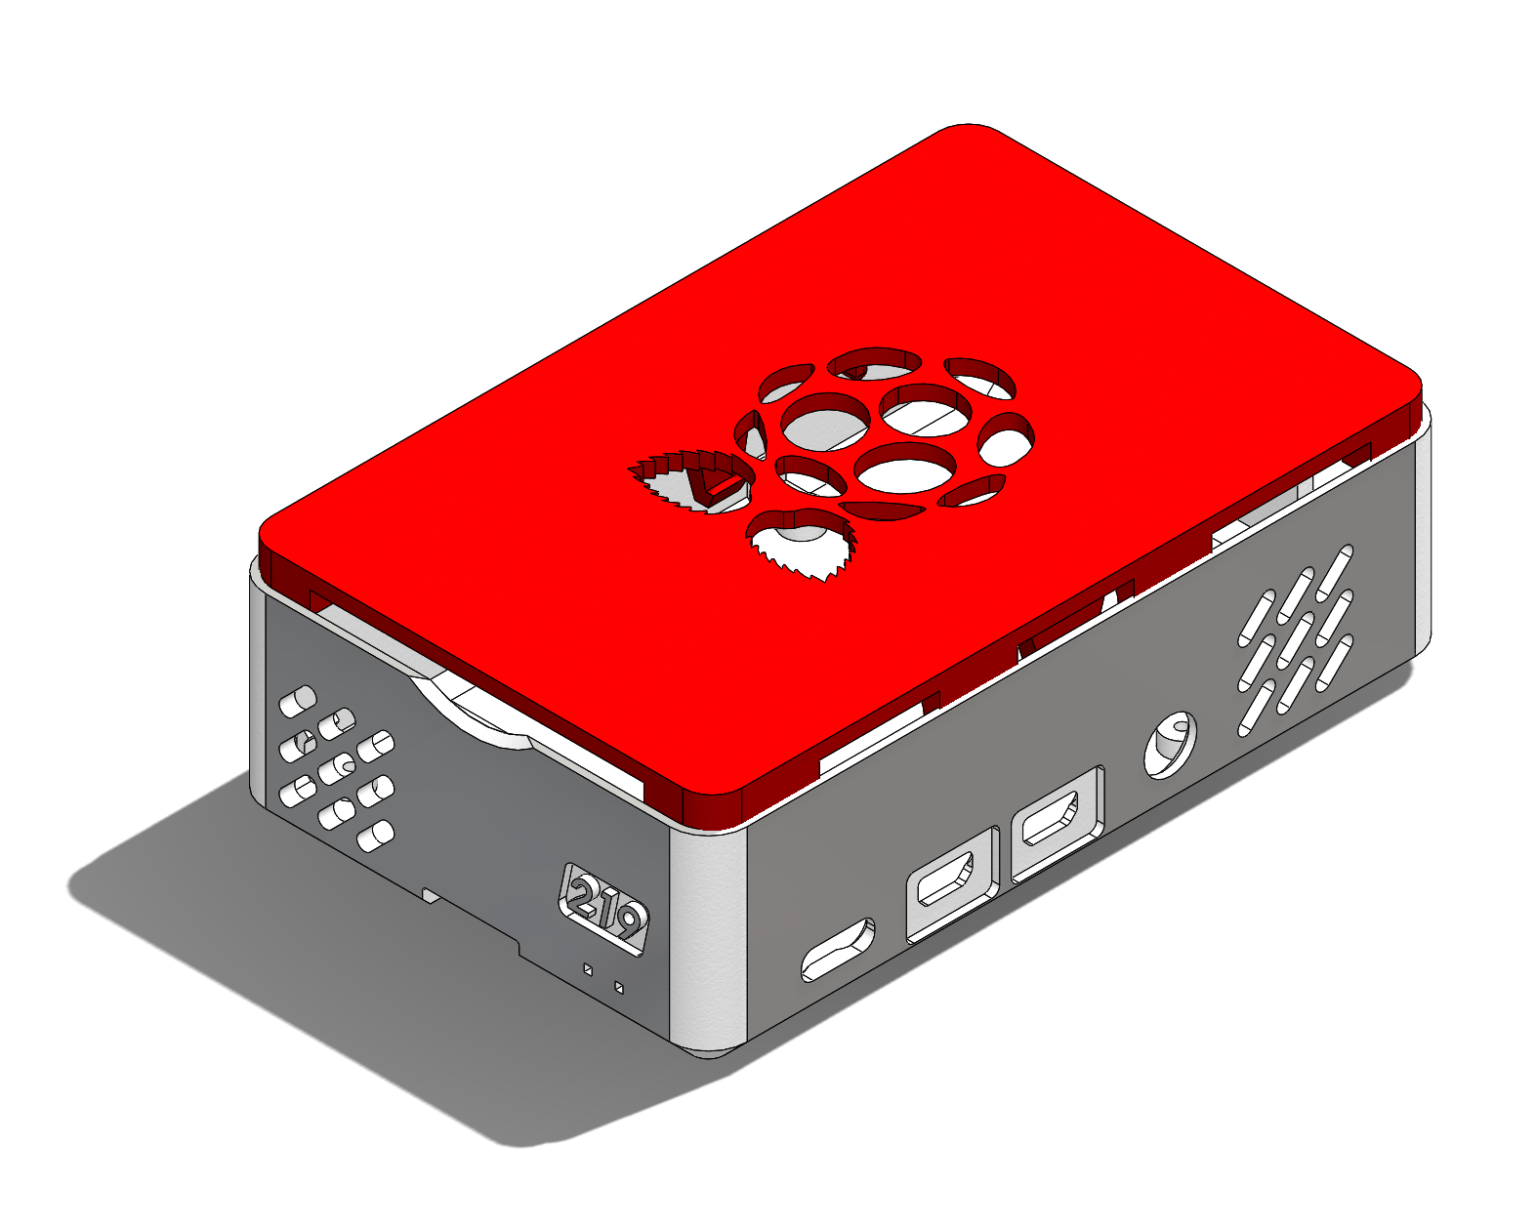 raspberry-pi-3d-printed-case-to-cool-from-219-design